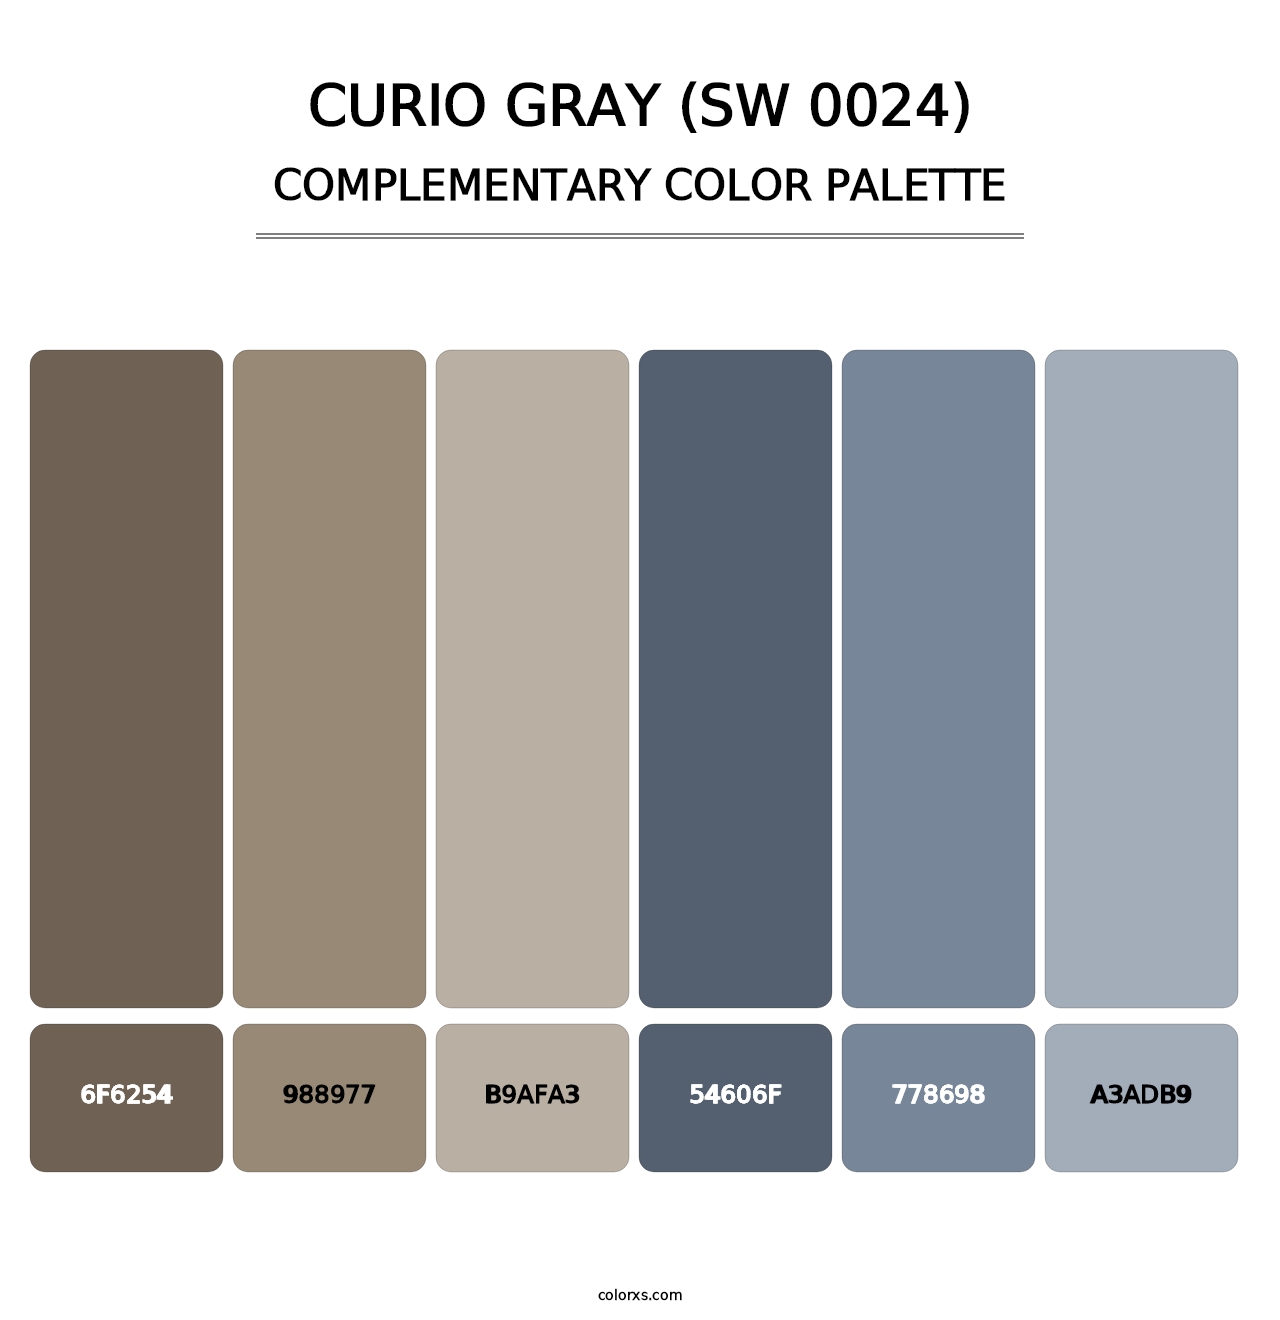 Curio Gray (SW 0024) - Complementary Color Palette